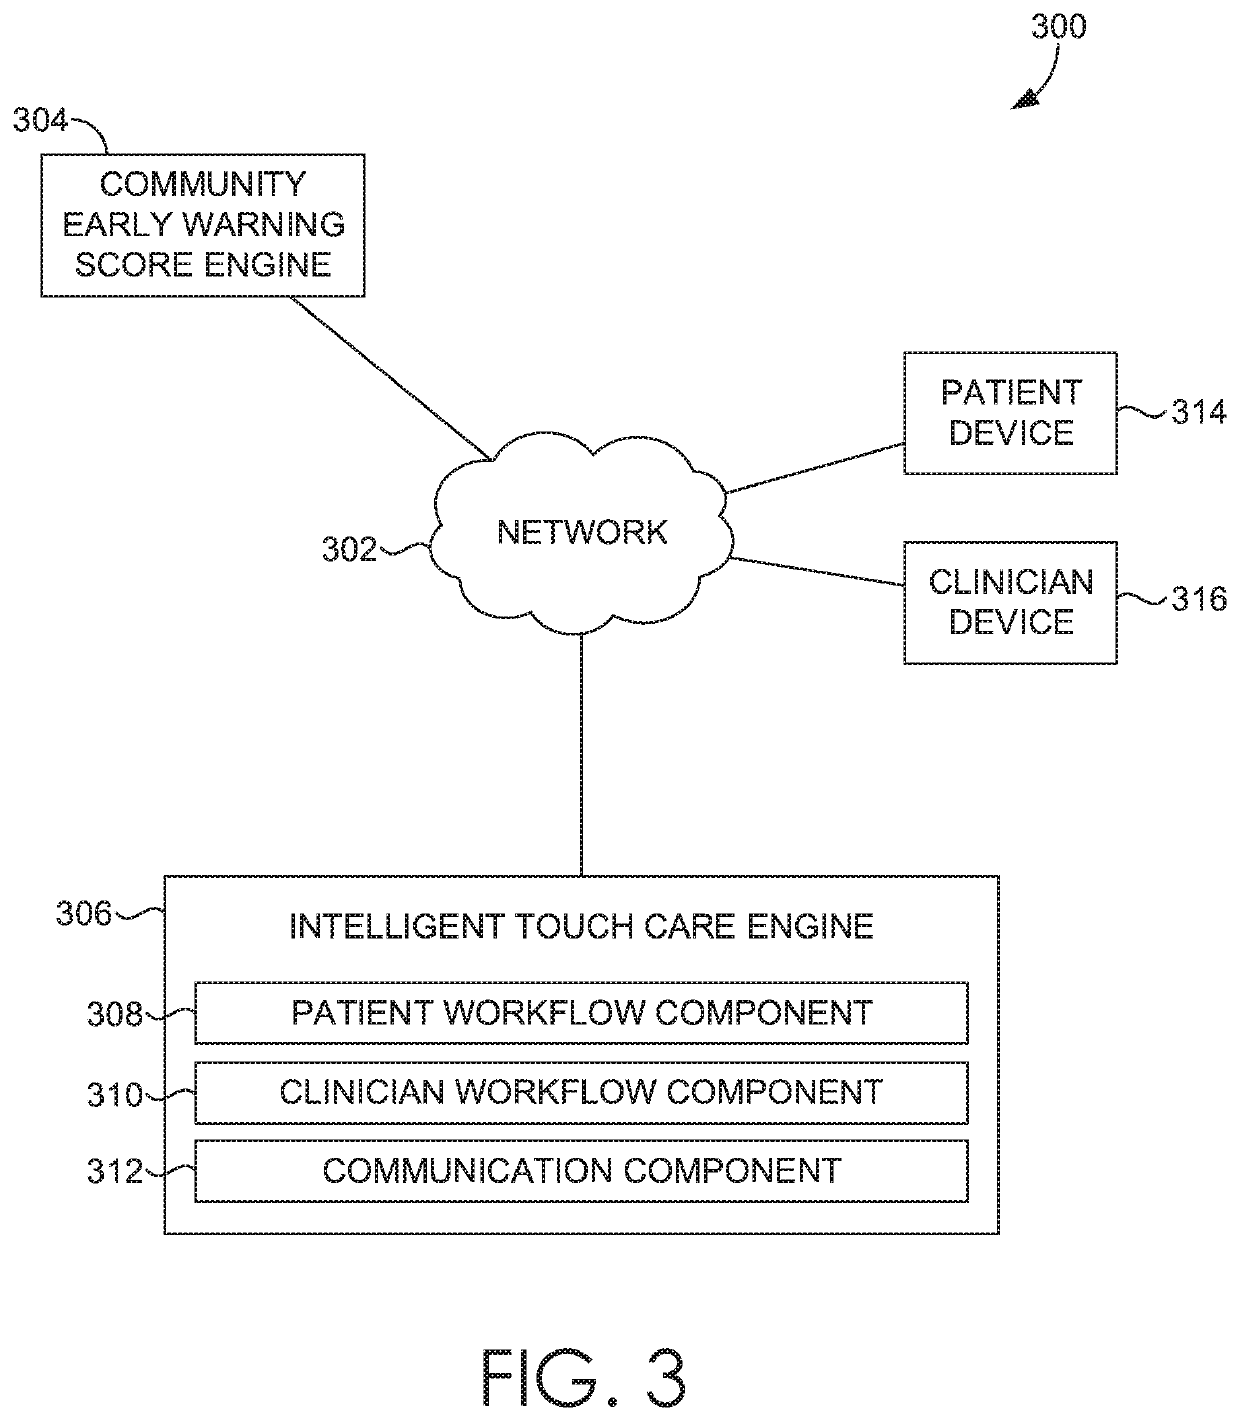 Intelligent touch care corresponding to an unscheduled clinician visit